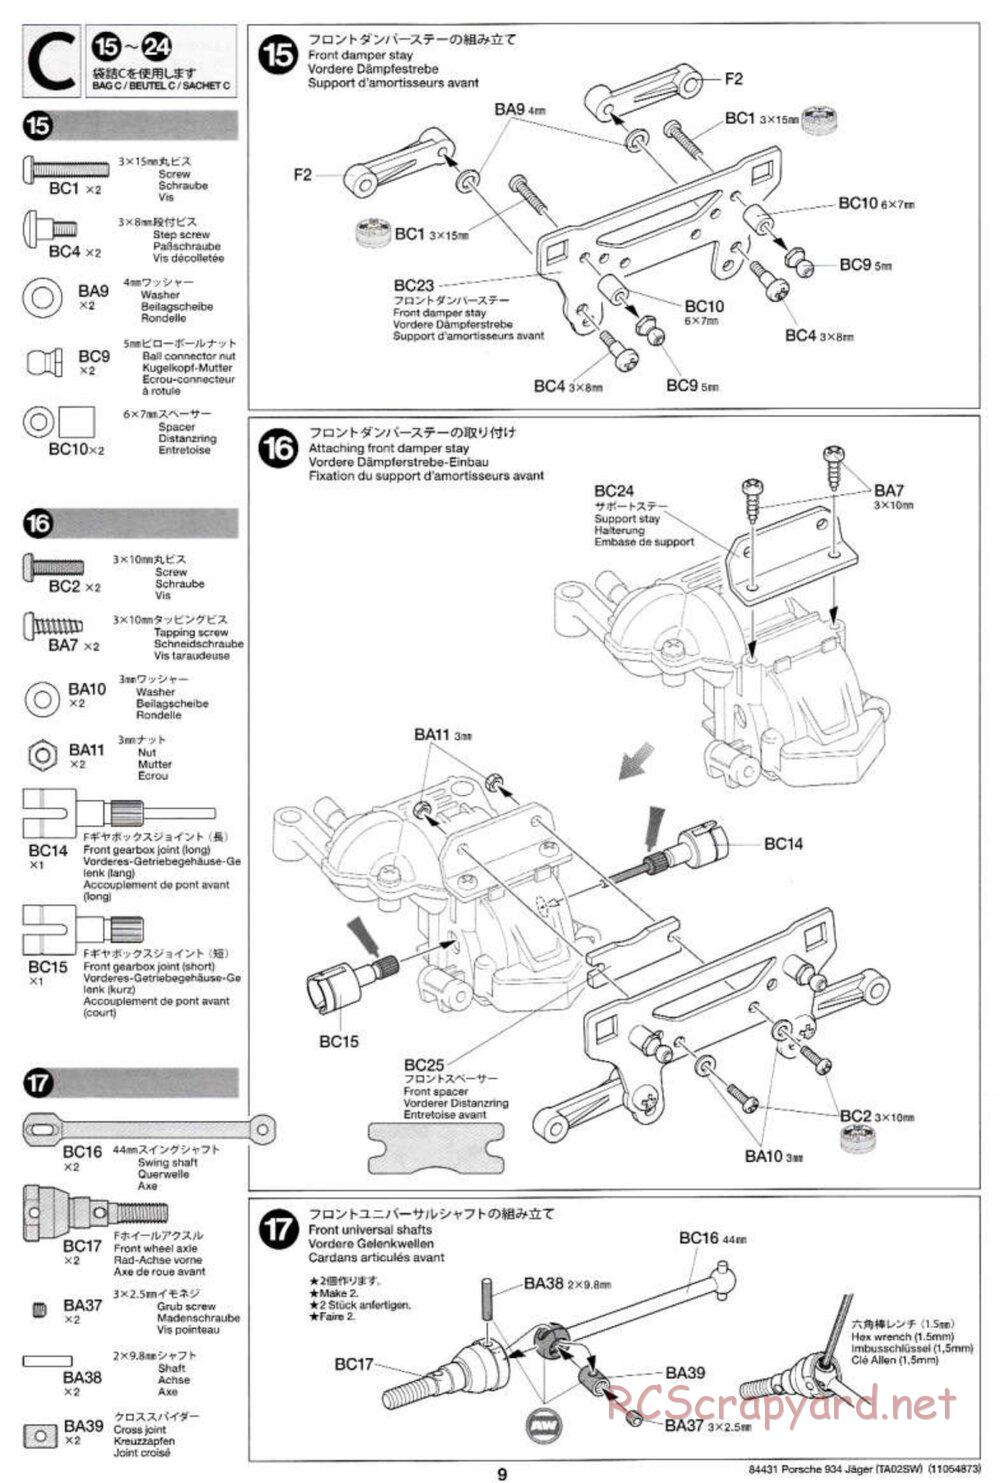 Tamiya - Porsche Turbo RSR Type 934 Jagermeister - TA-02SW Chassis - Manual - Page 9